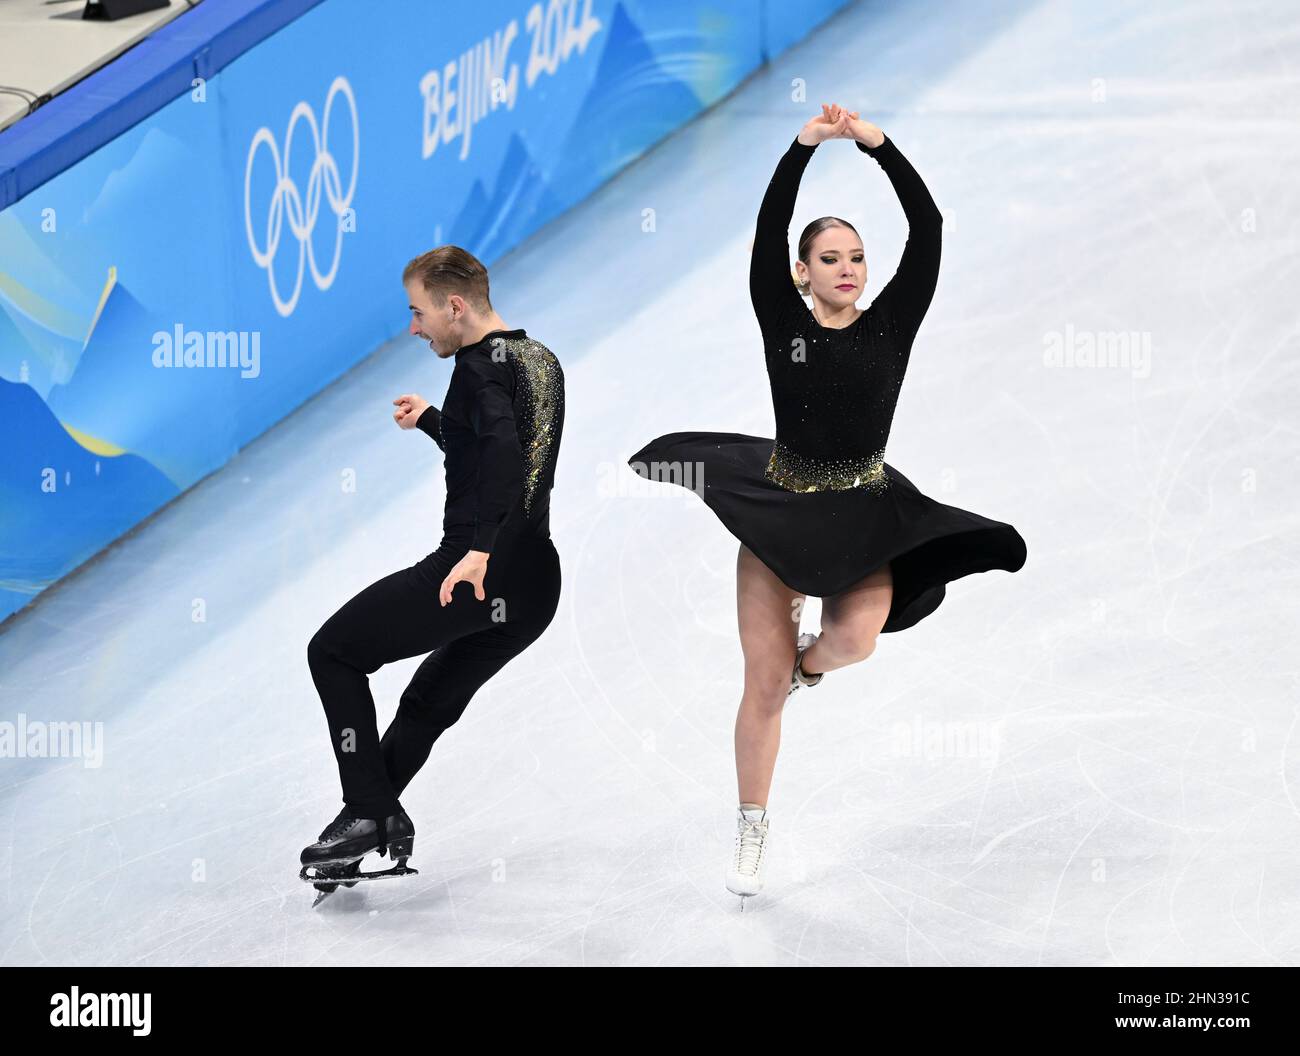 Beijing, China. 14th Feb, 2022. Natalie Taschlerova (R) and Filip Taschler of Czech Republic perform during the figure skating ice dance free dance match of Beijing 2022 Winter Olympics at Capital Indoor Stadium in Beijing, capital of China, Feb. 14, 2022. Credit: Wu Wei/Xinhua/Alamy Live News Stock Photo